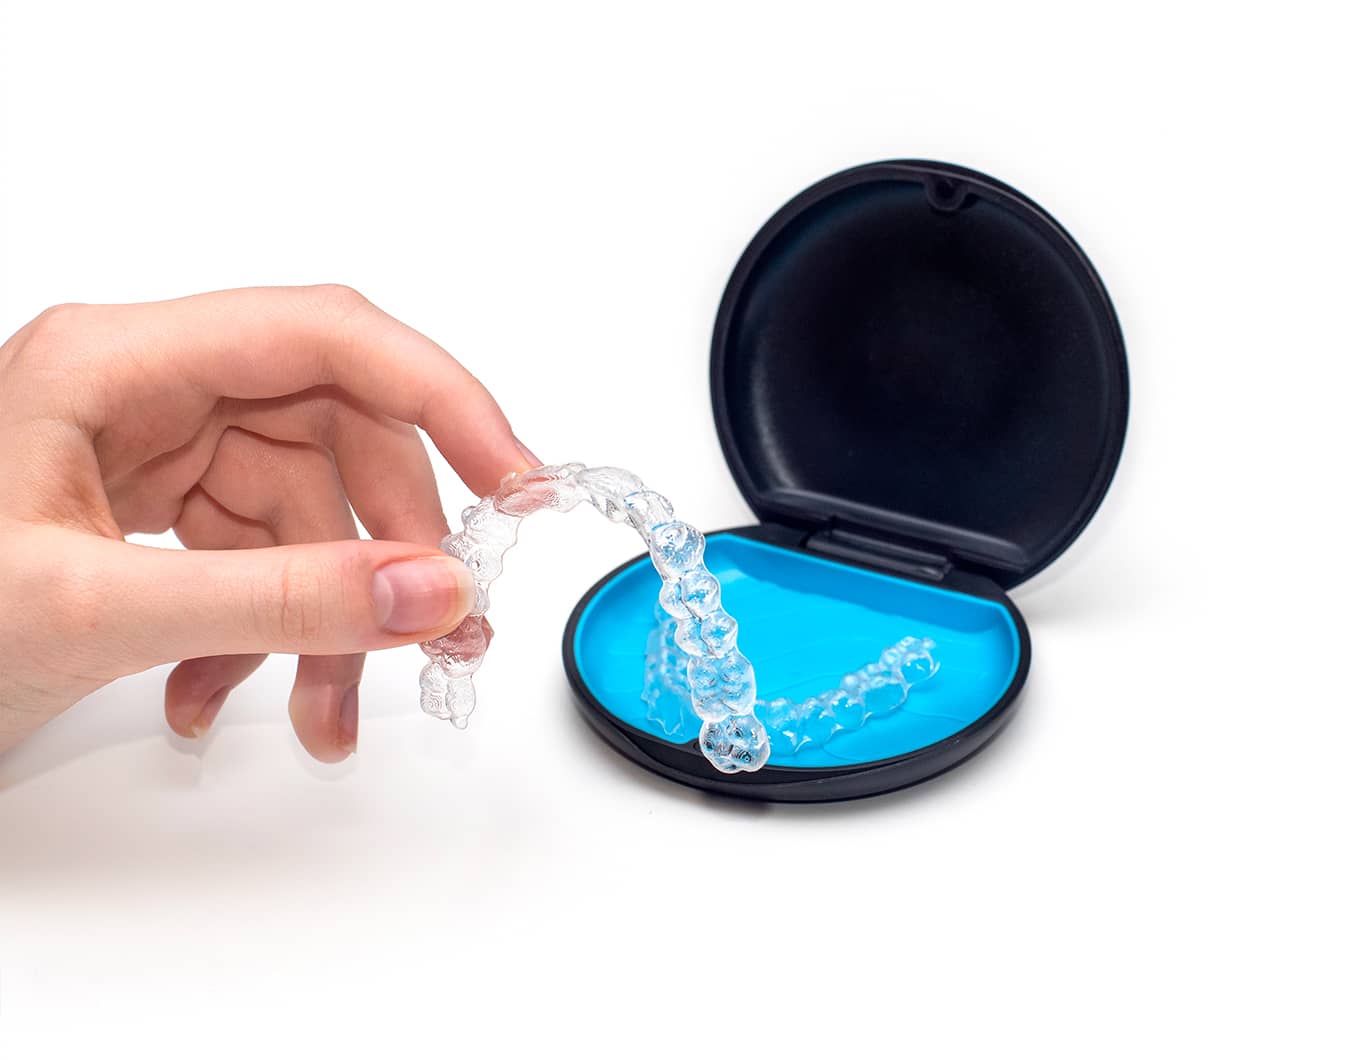 Case and hand holding an invisalign